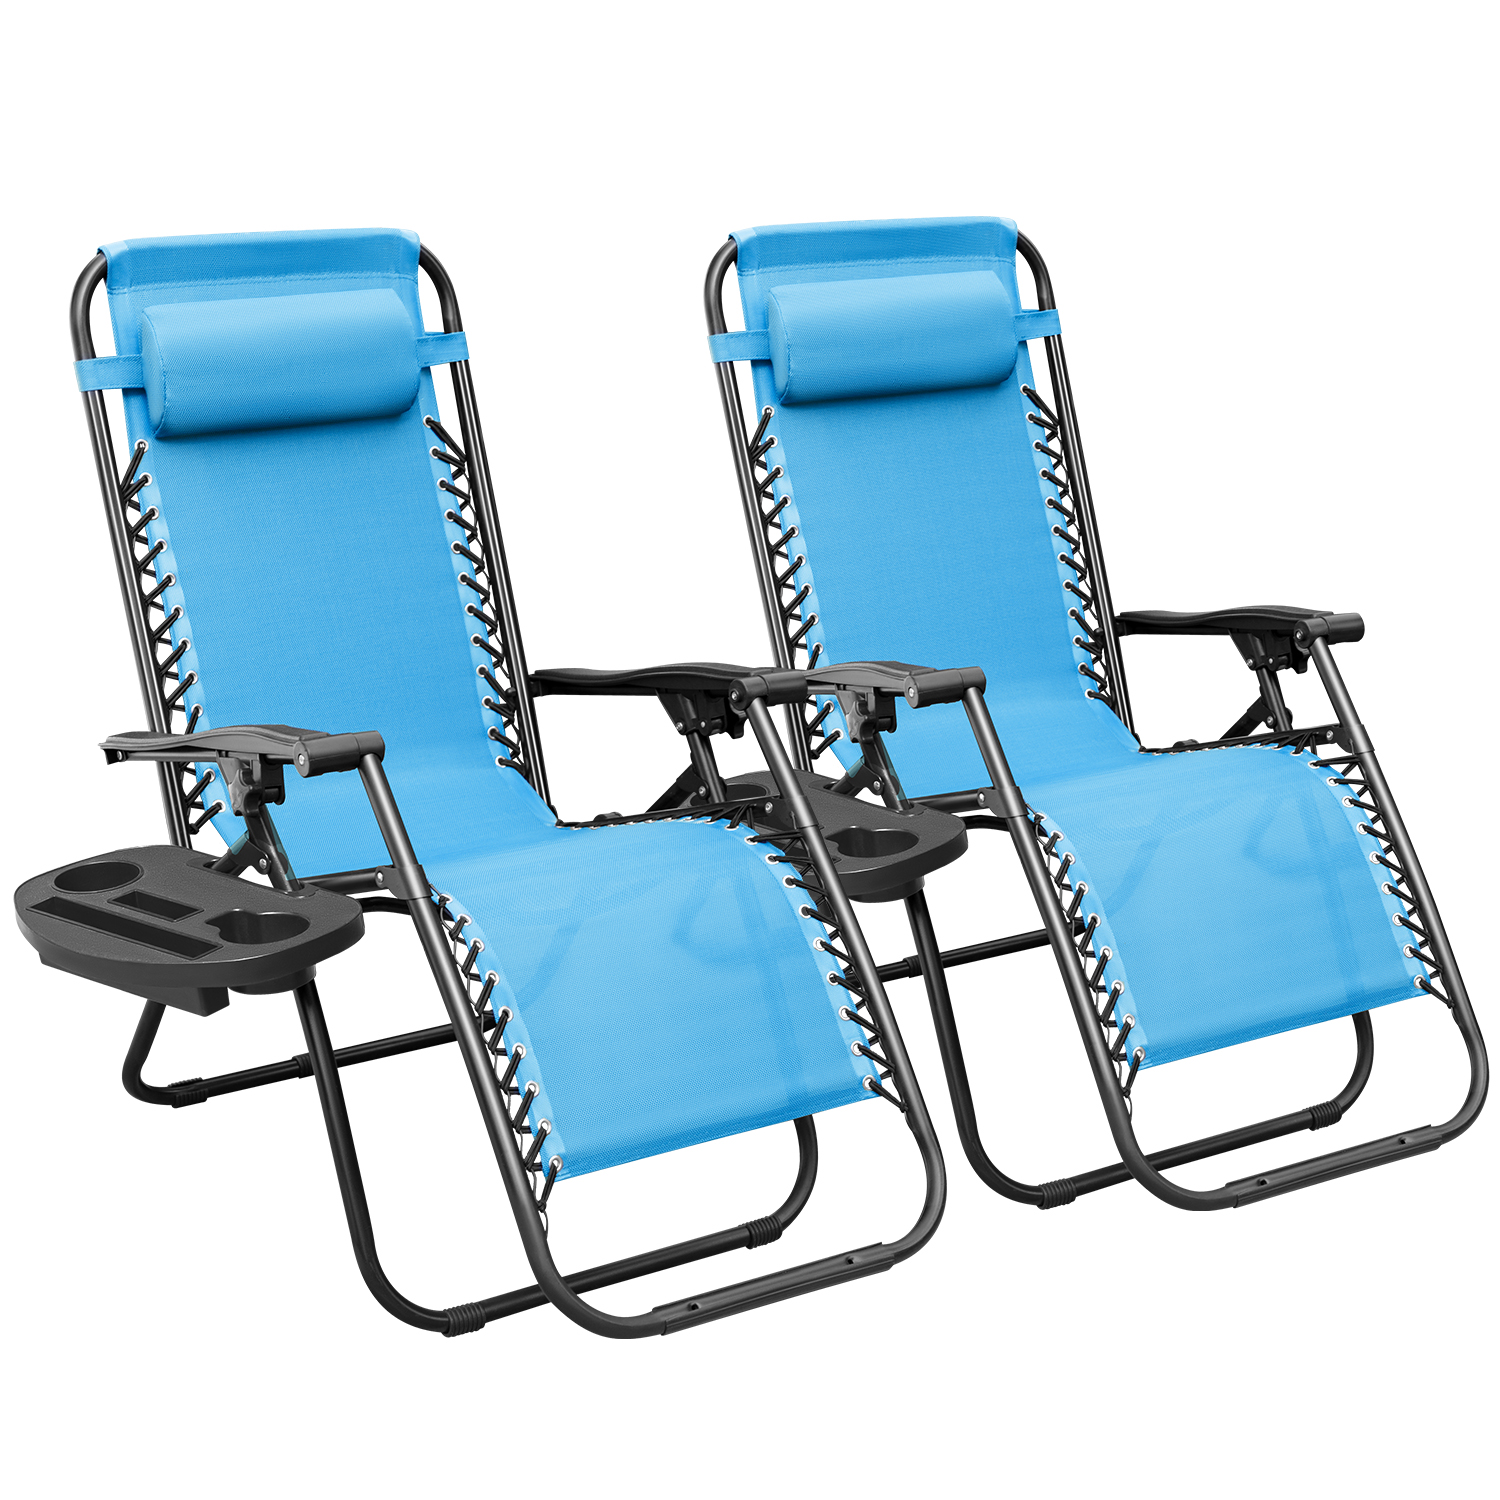 Lacoo Patio Zero Gravity Chair Outdoor Adjustable Recline Chair seating capacity 2, Light Blue - image 1 of 7